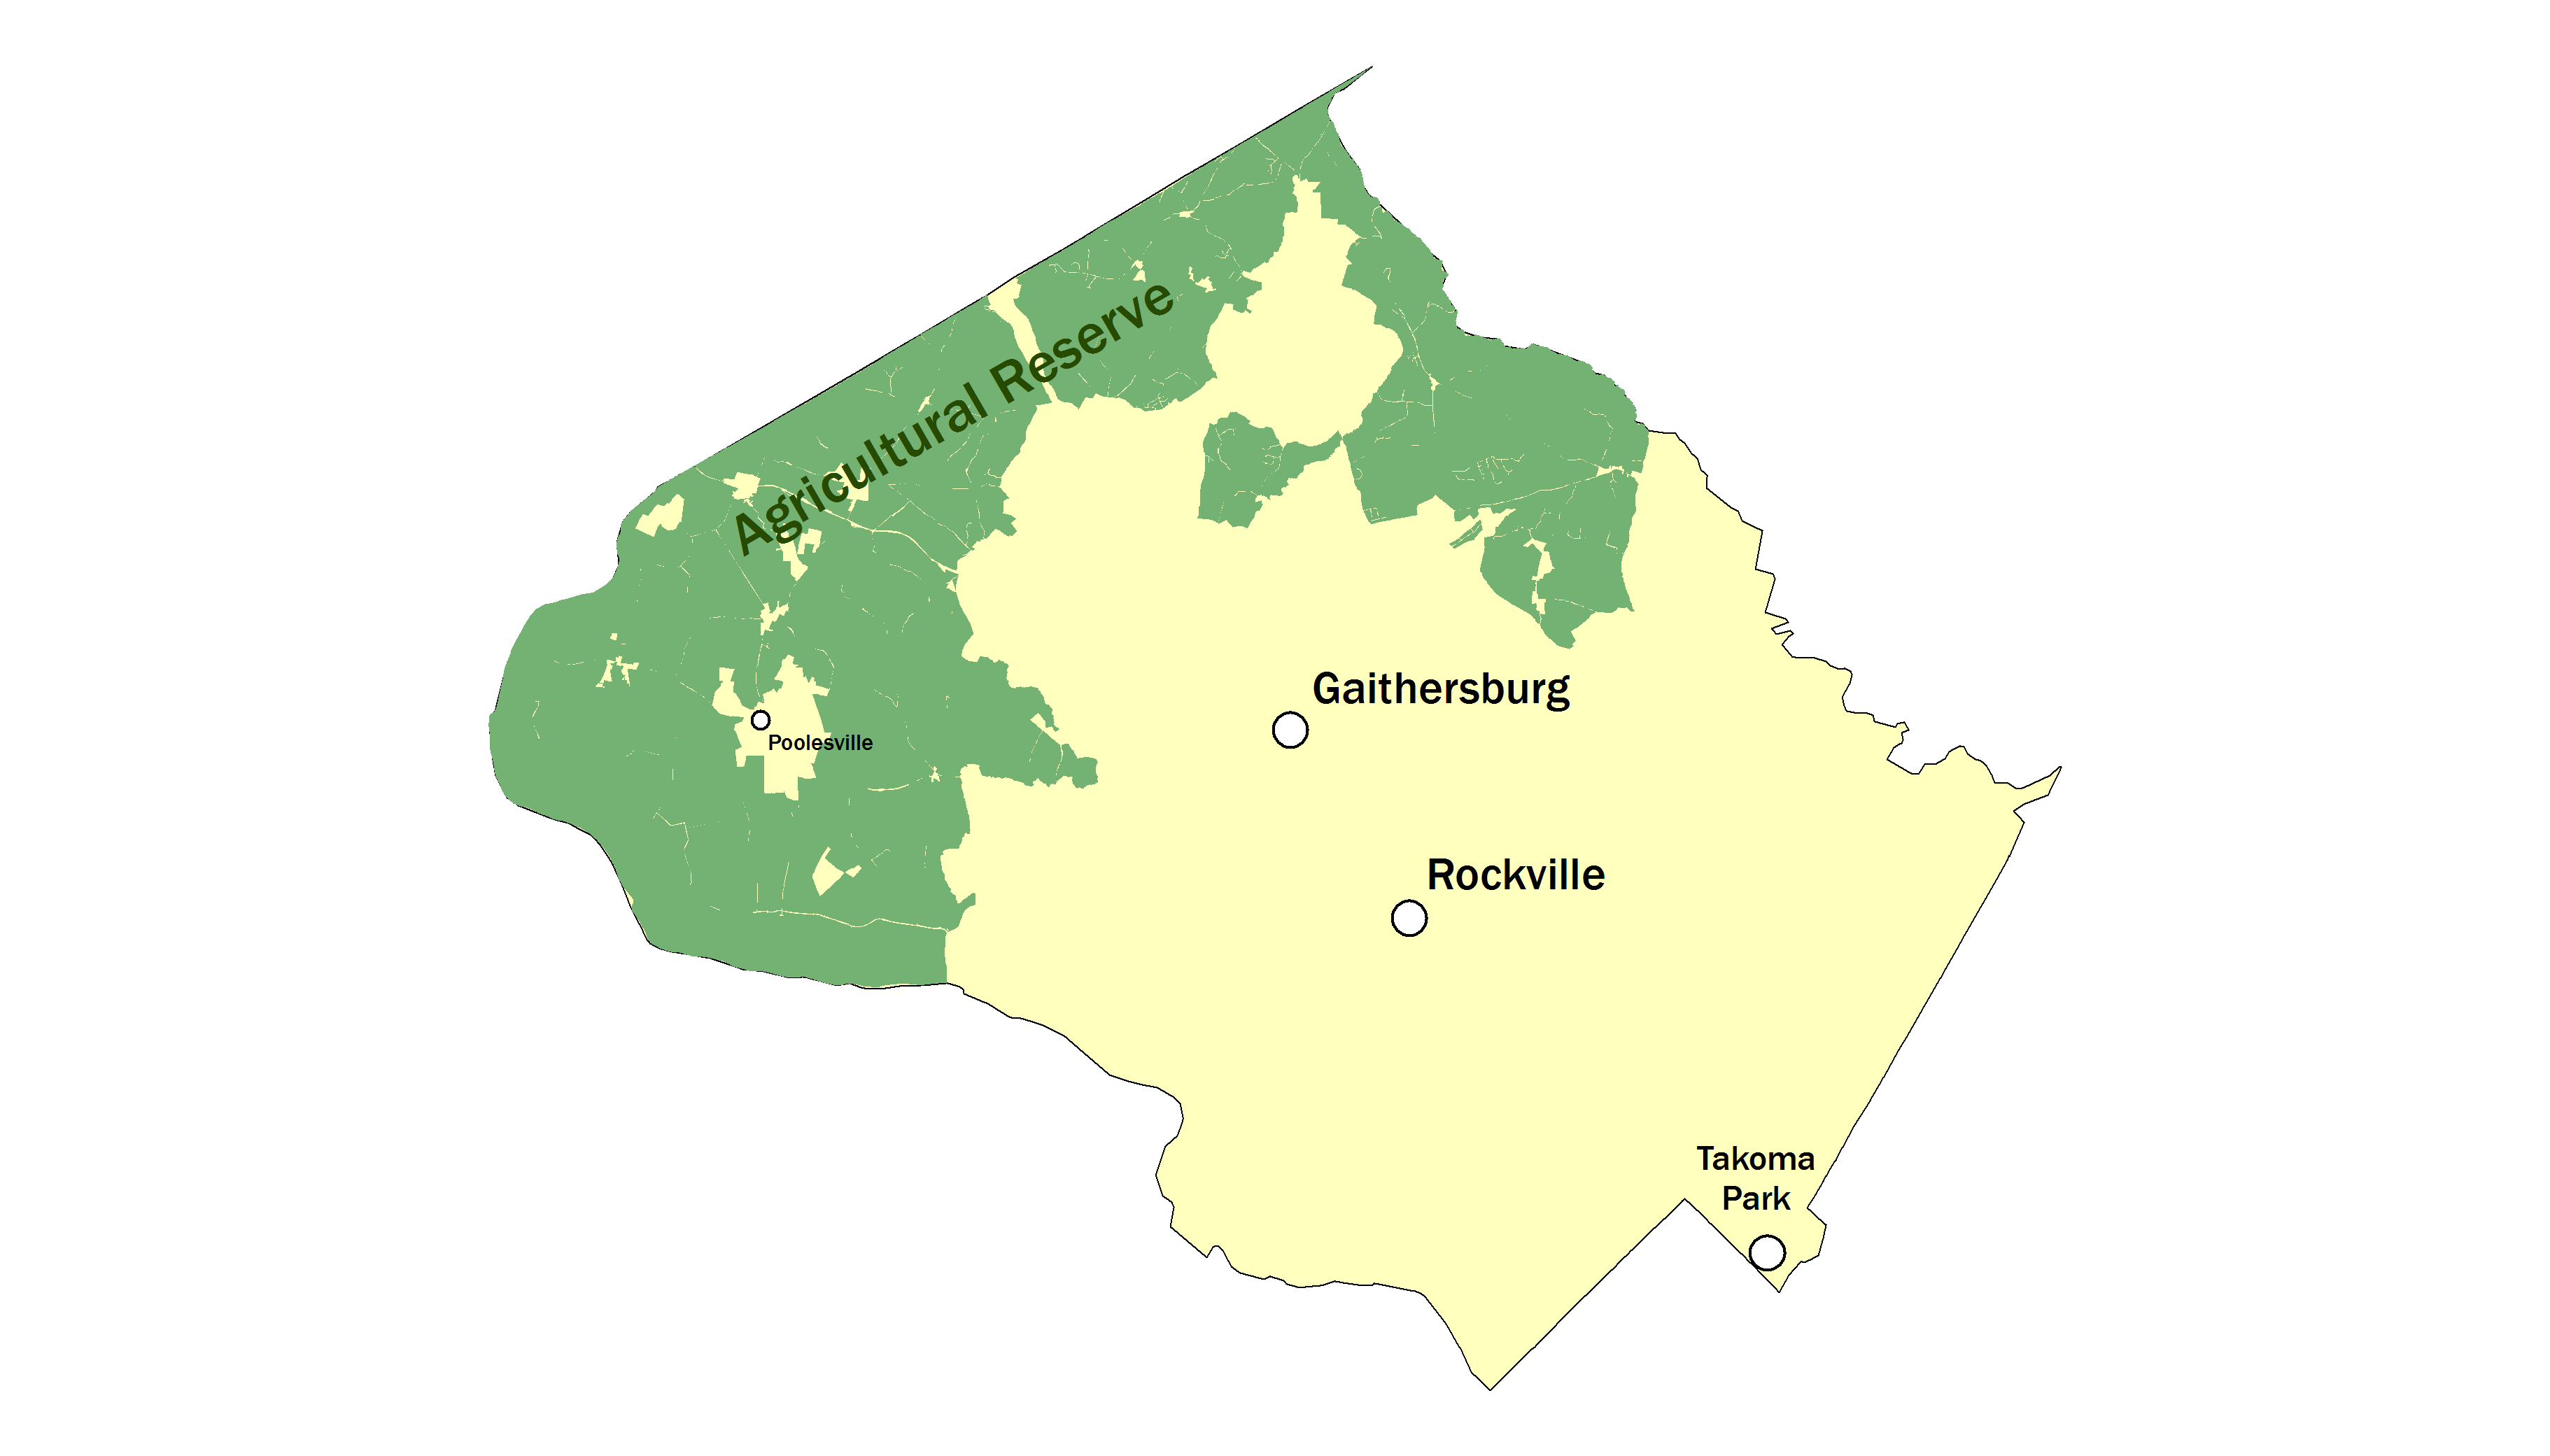 A map of Montgomery County, Maryland. Most of the county is shown in yellow. The cities of Takoma Park, Rockville, and Gaithersburg are labeled in the large yellow area containing all of the southern, eastern, and central parts of the county. The town of Poolsville in the western part of the county is labeled and shown in a small yellow area. The western and northern edges of the county are shown in green with the label "Agricultural Reserve."